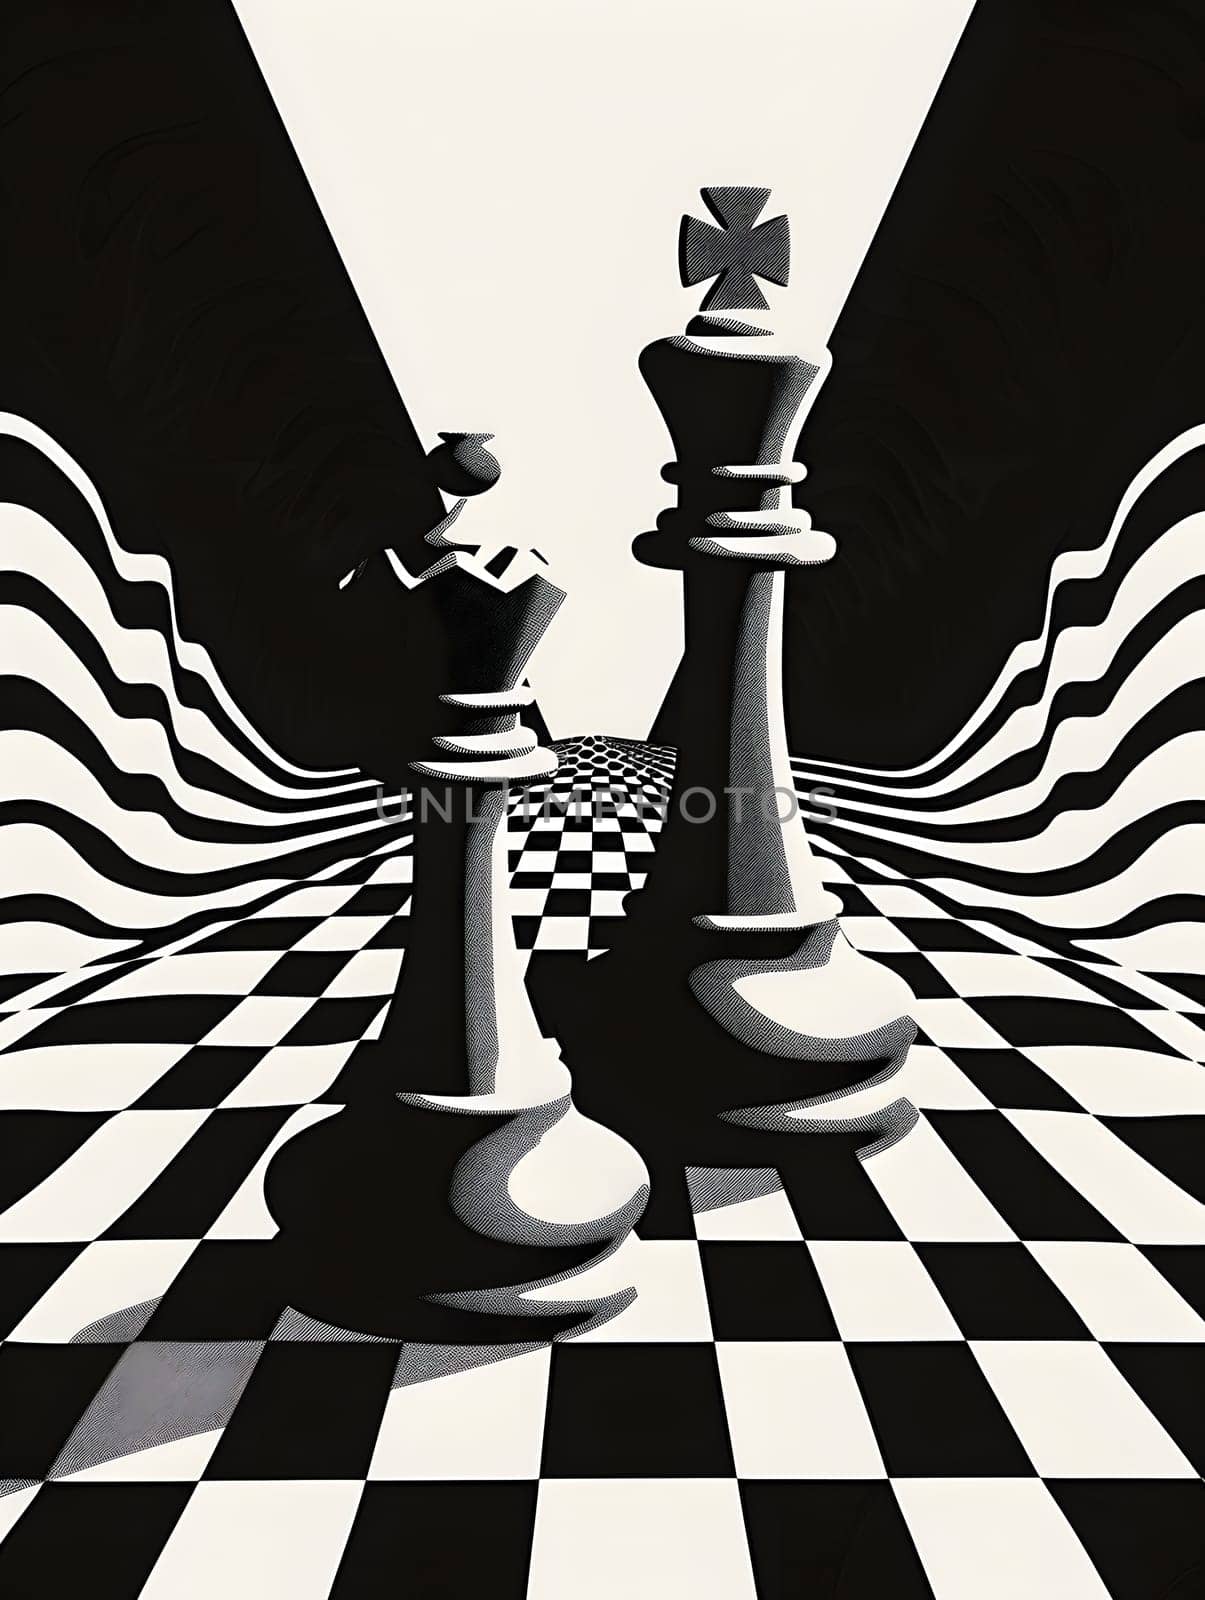 A black and white photograph of two chess pieces on a checkered board, capturing the essence of the classic indoor board game in timeless tints and shades